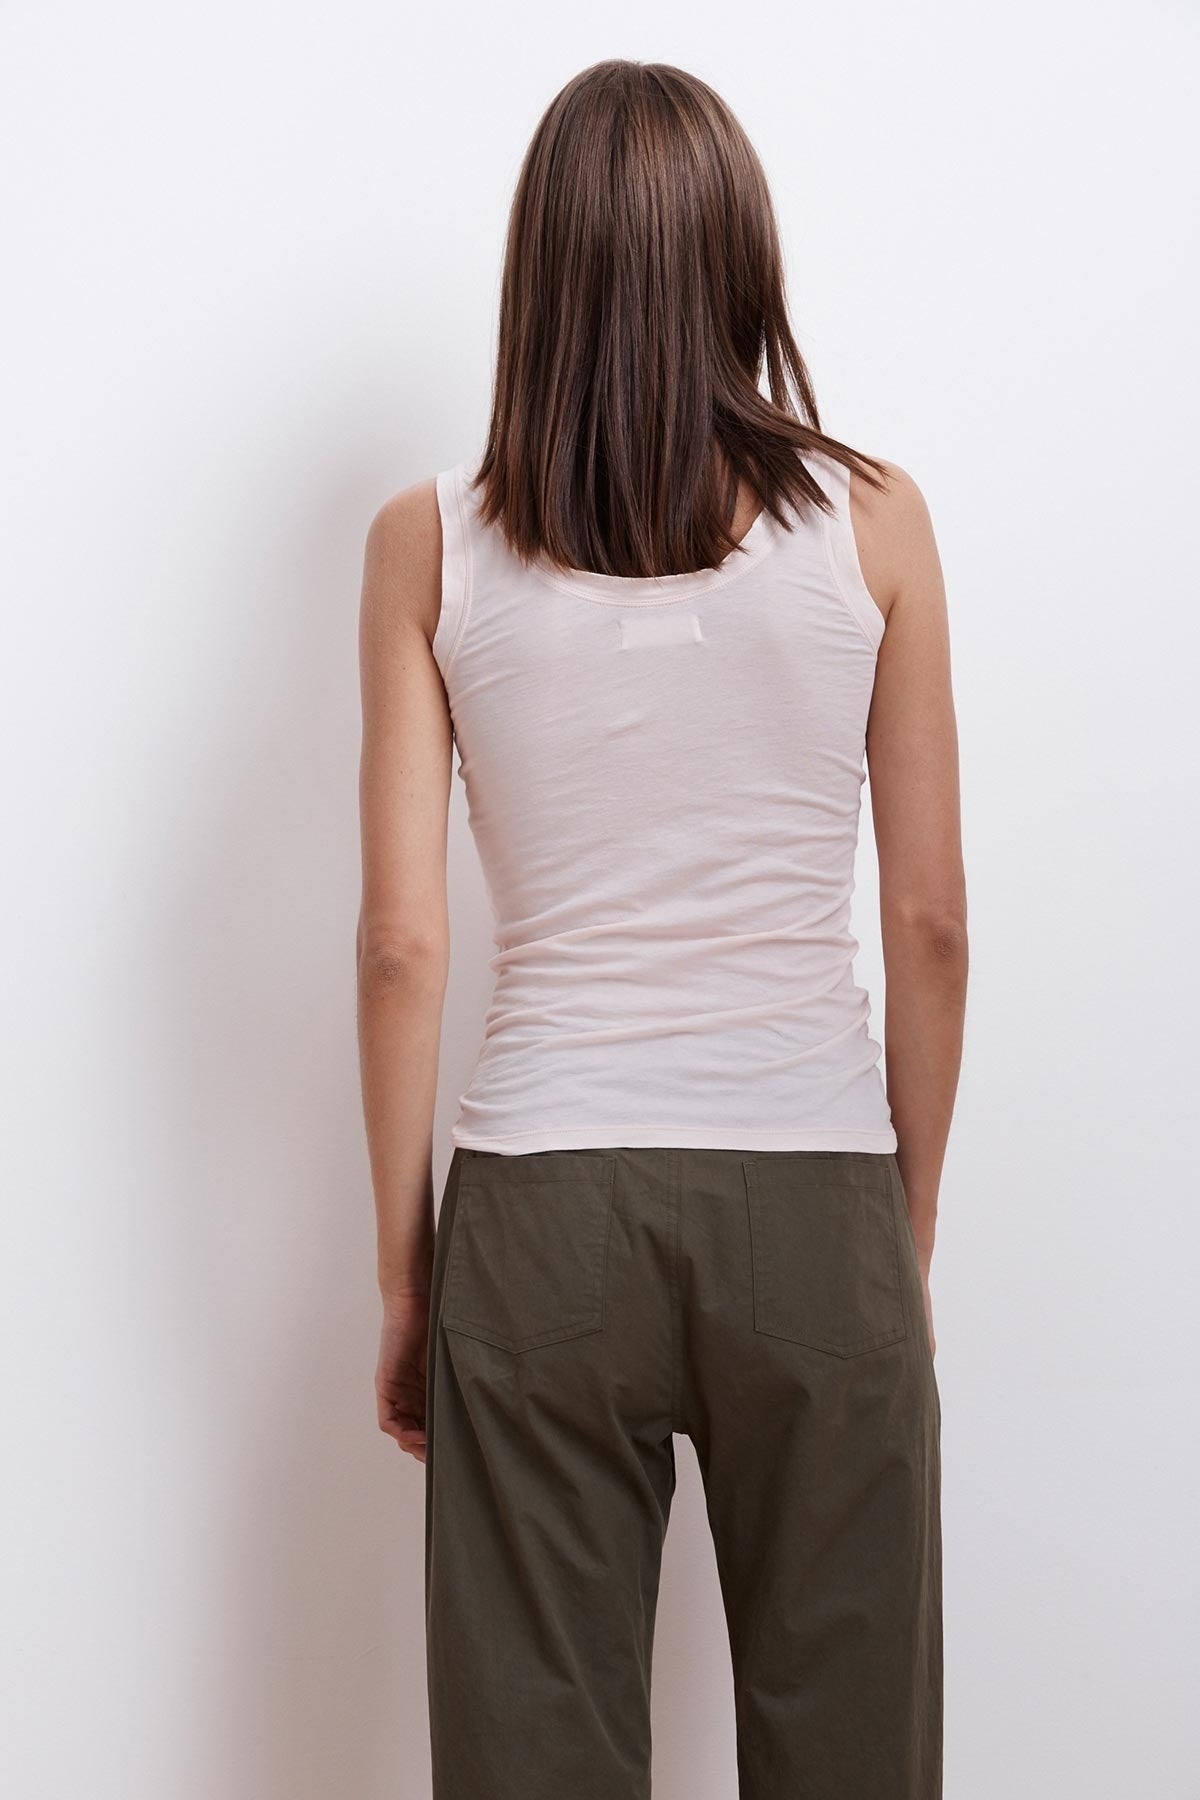 The back of a woman wearing khaki pants and a MOSSY GAUZY WHISPER FITTED TANK by Velvet by Graham & Spencer.-23854475411649